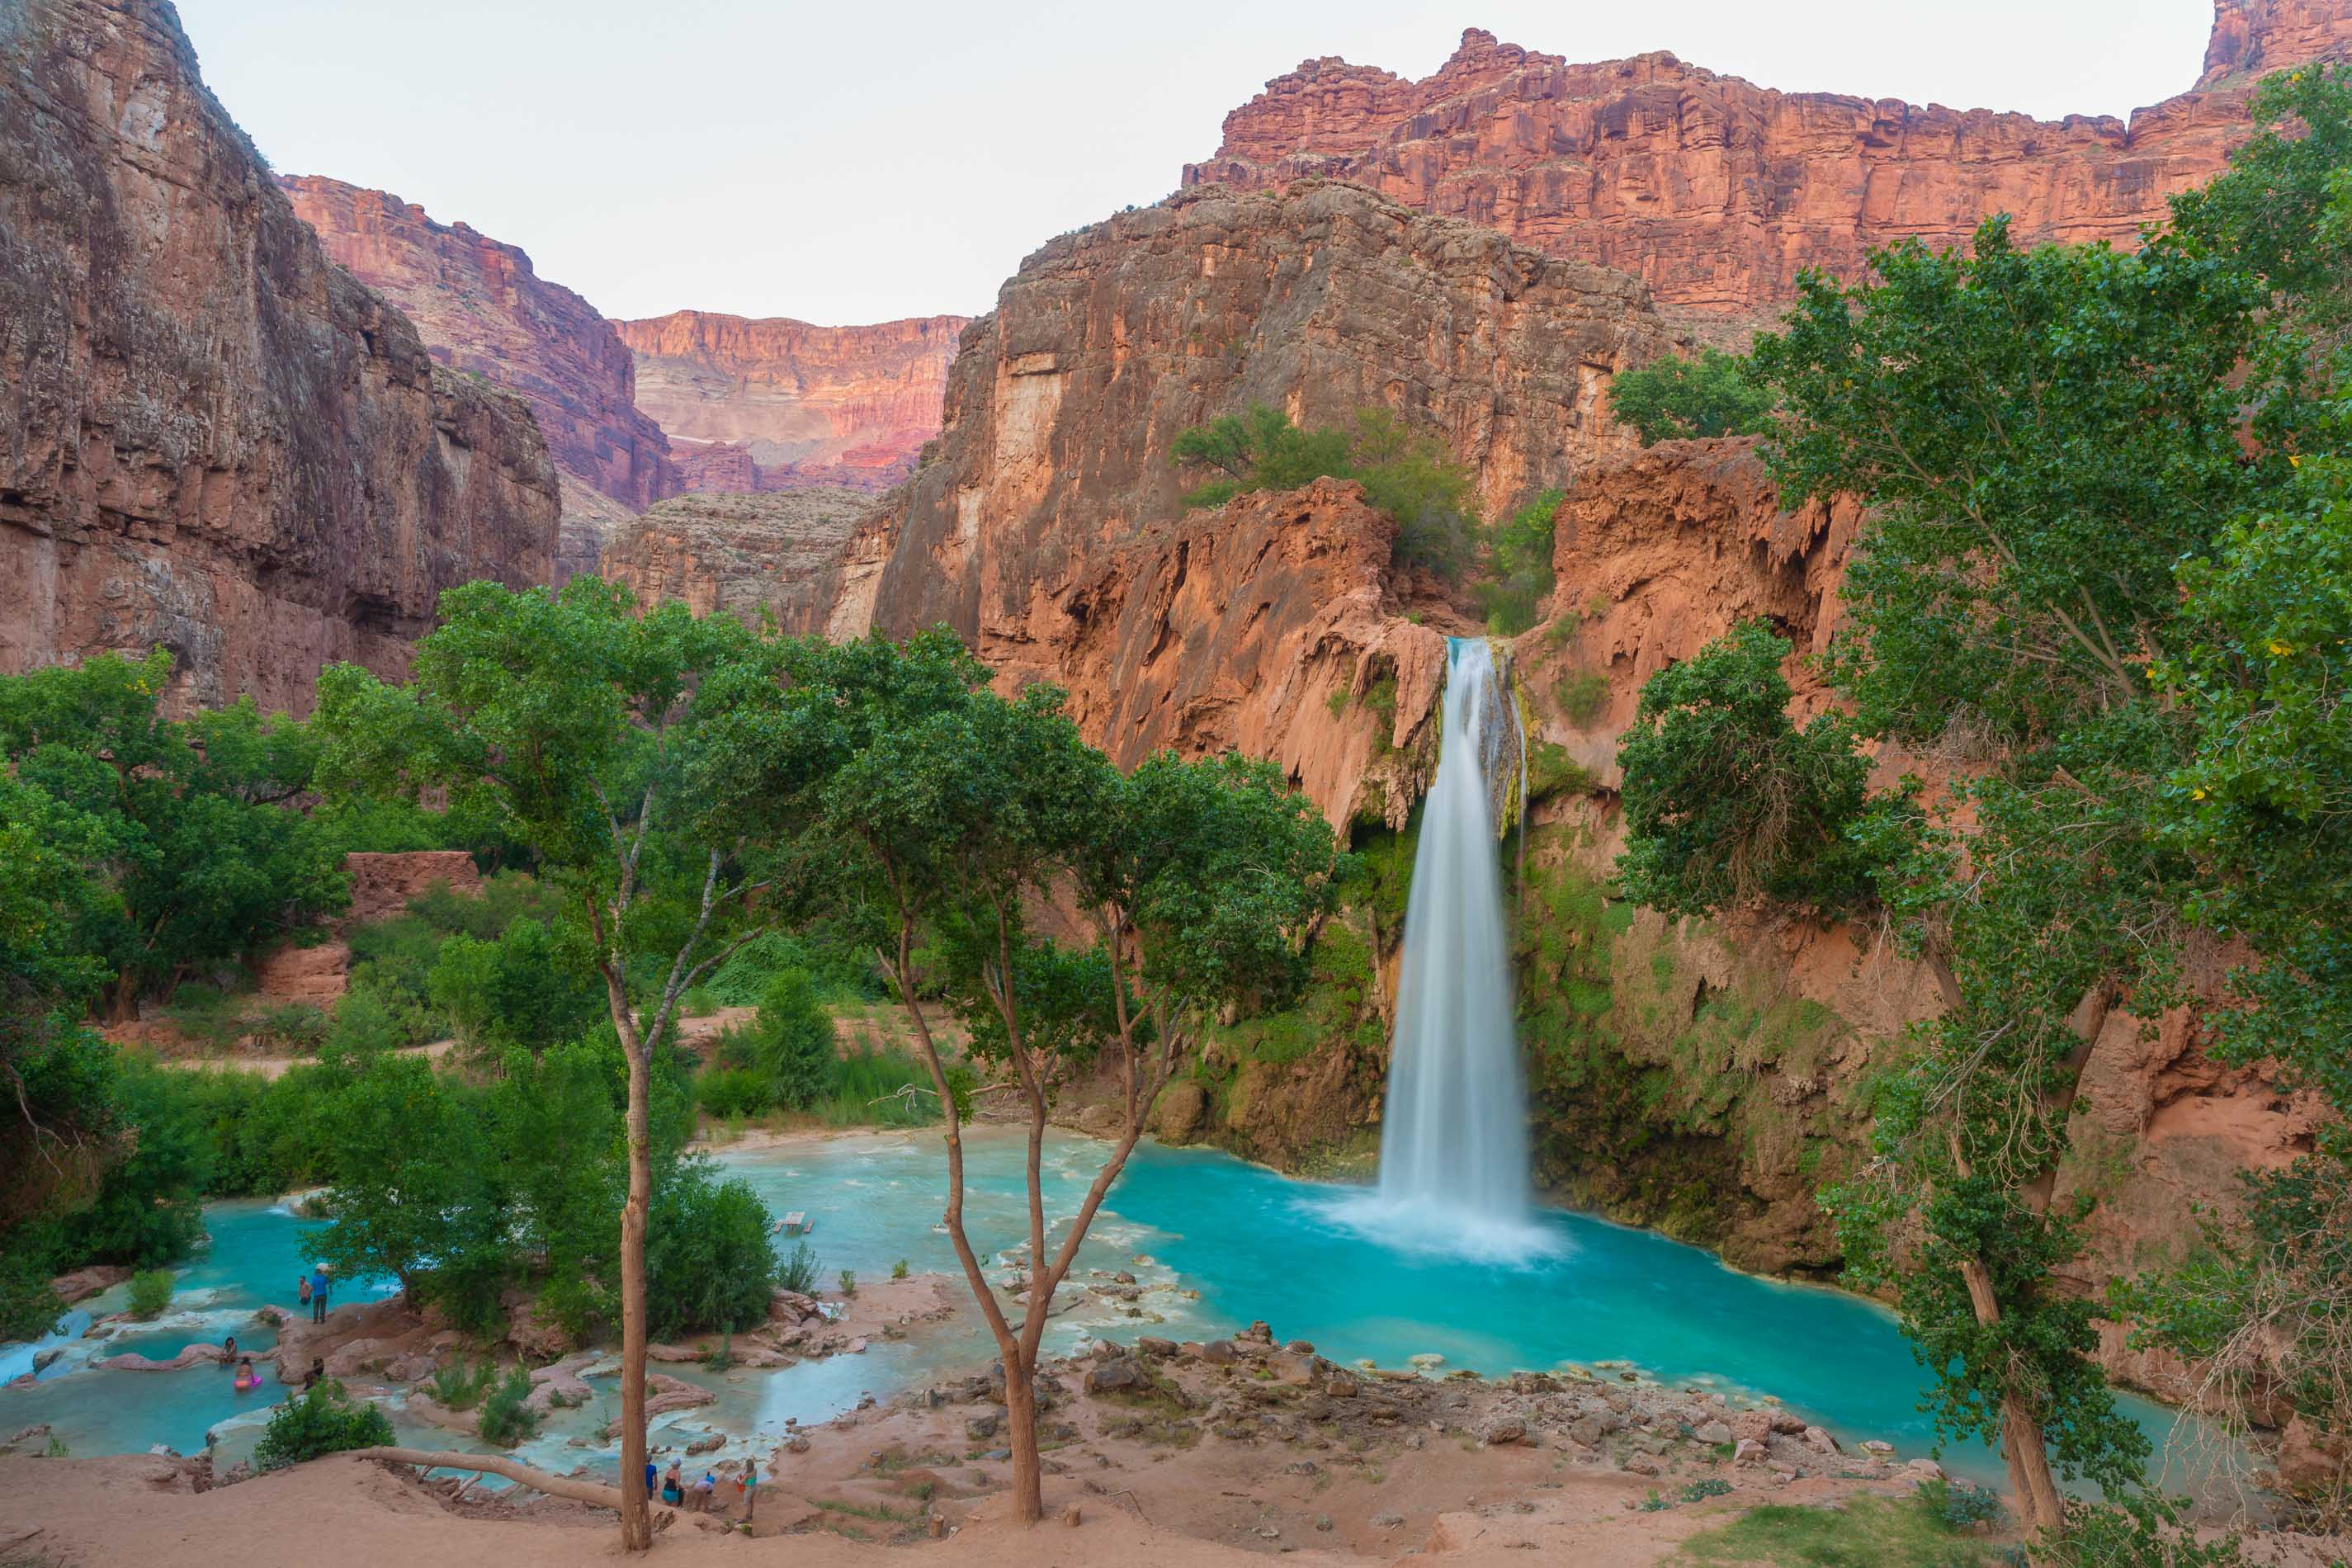 New York Times / Within the Grand Canyon, the Lure of Havasu Falls